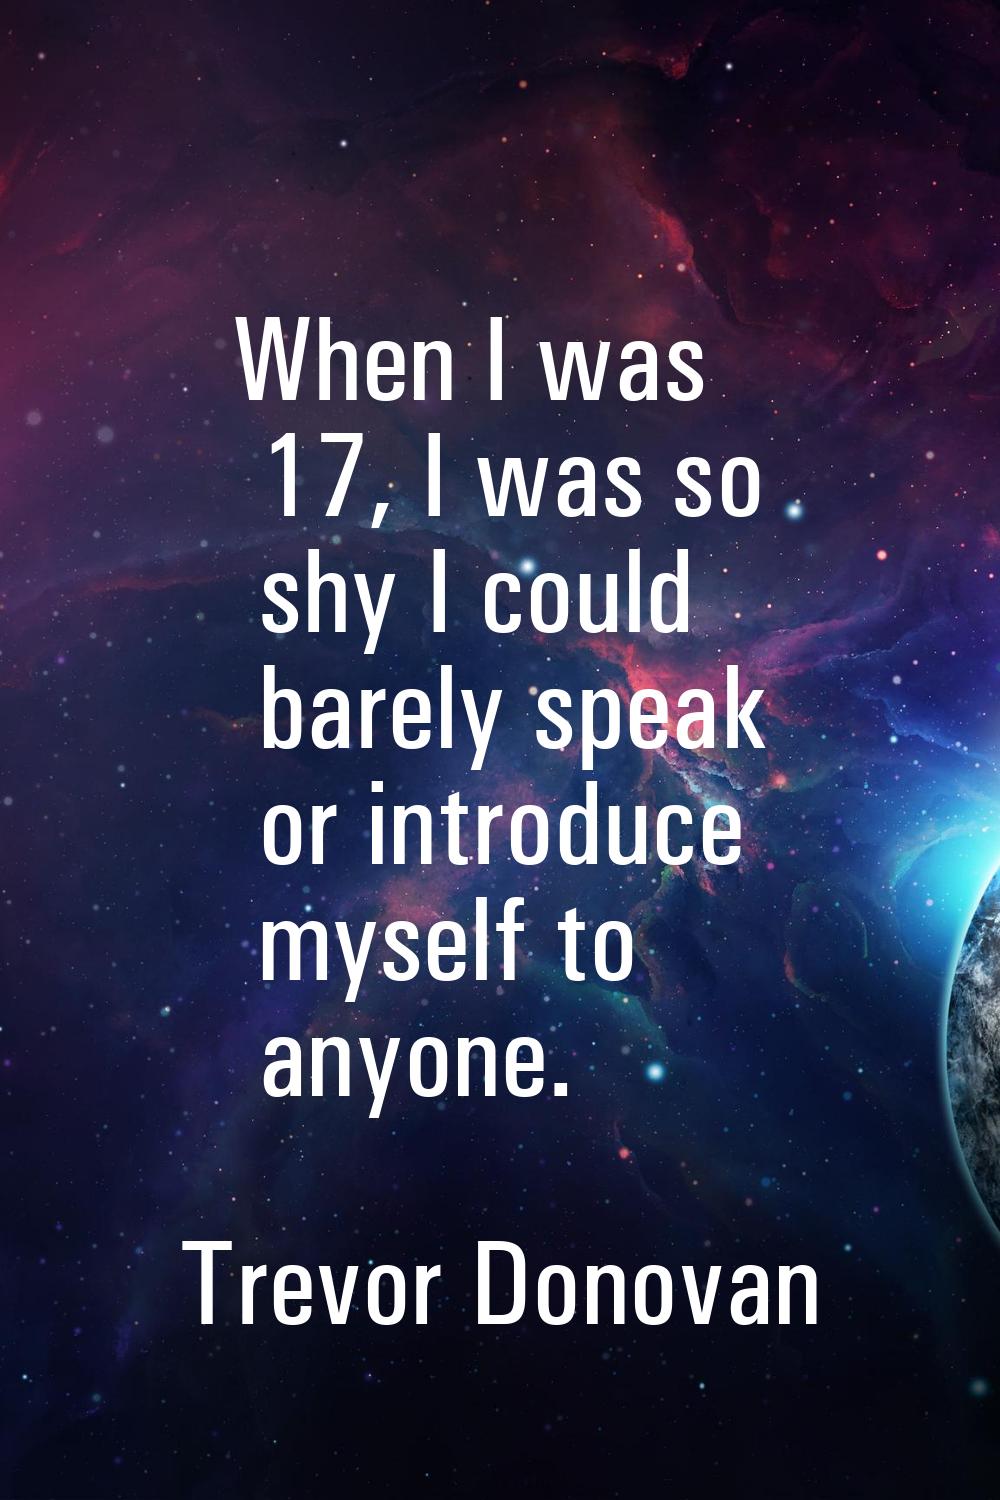 When I was 17, I was so shy I could barely speak or introduce myself to anyone.